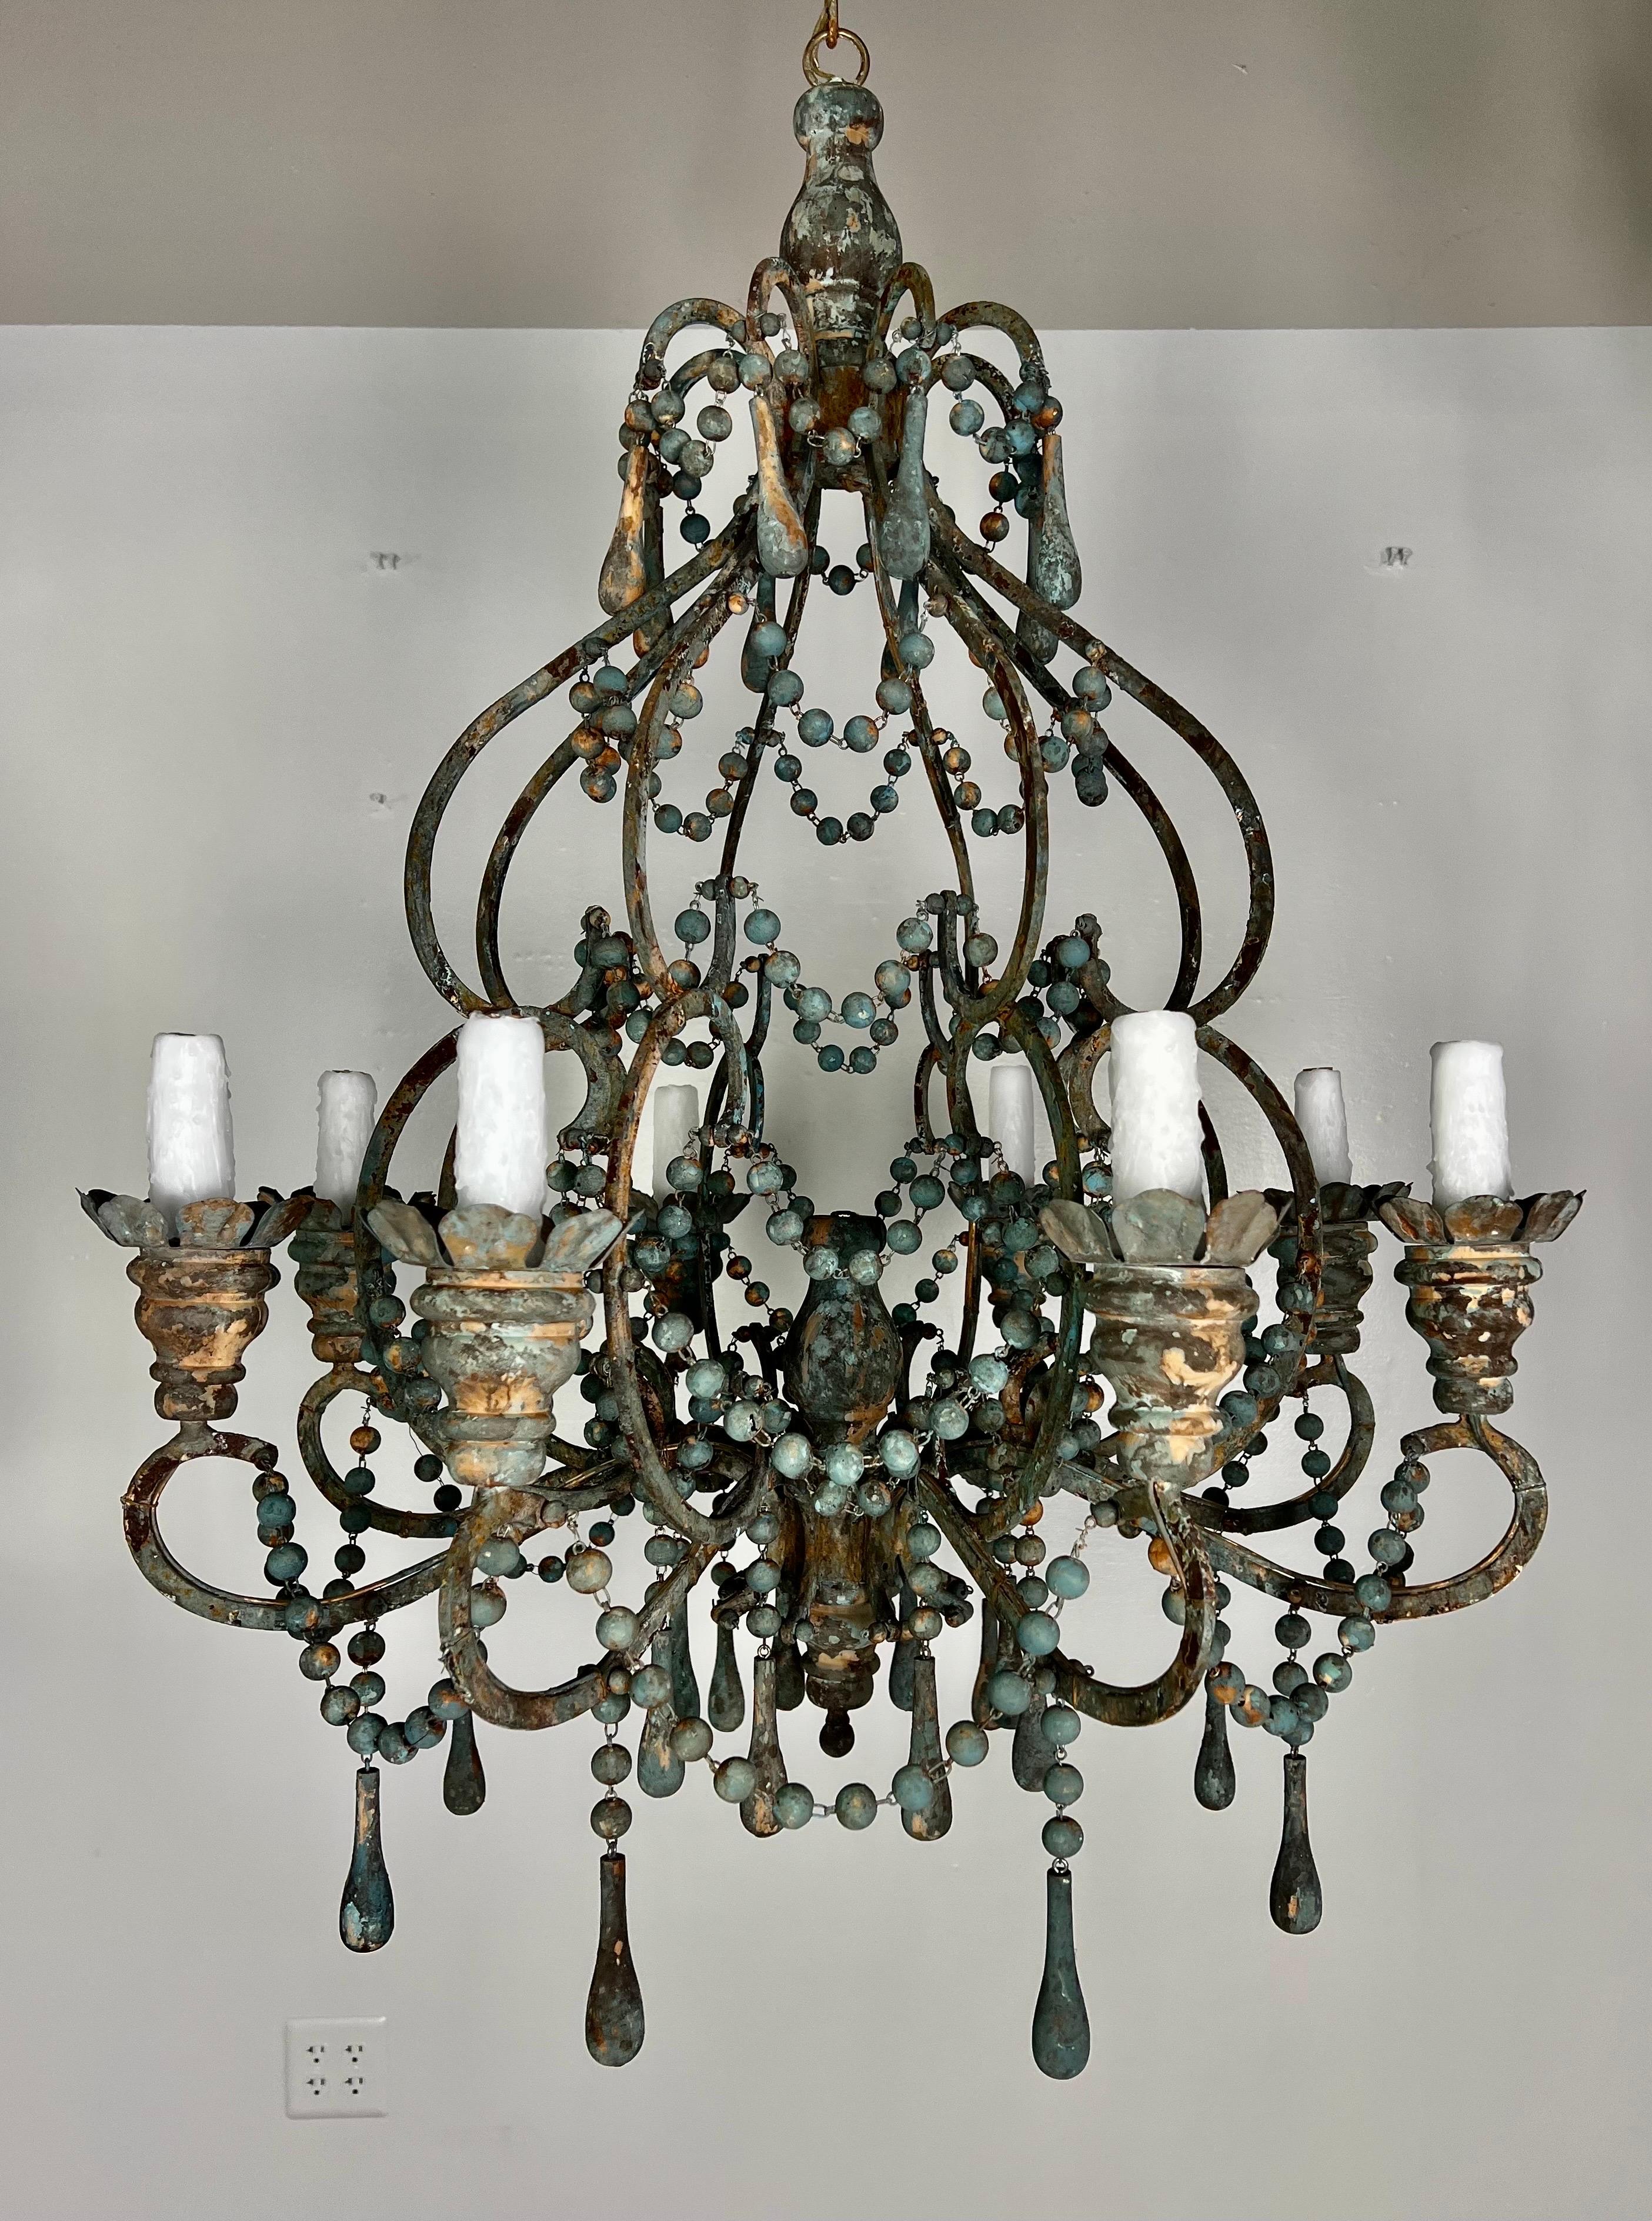 Custom eight light Italian style chandelier with vintage garlands of painted beads and vintage wood drops throughout. The chandelier is painted in an antique steel blue coloration with gold & rust accents throughout. The eight light fixture is newly